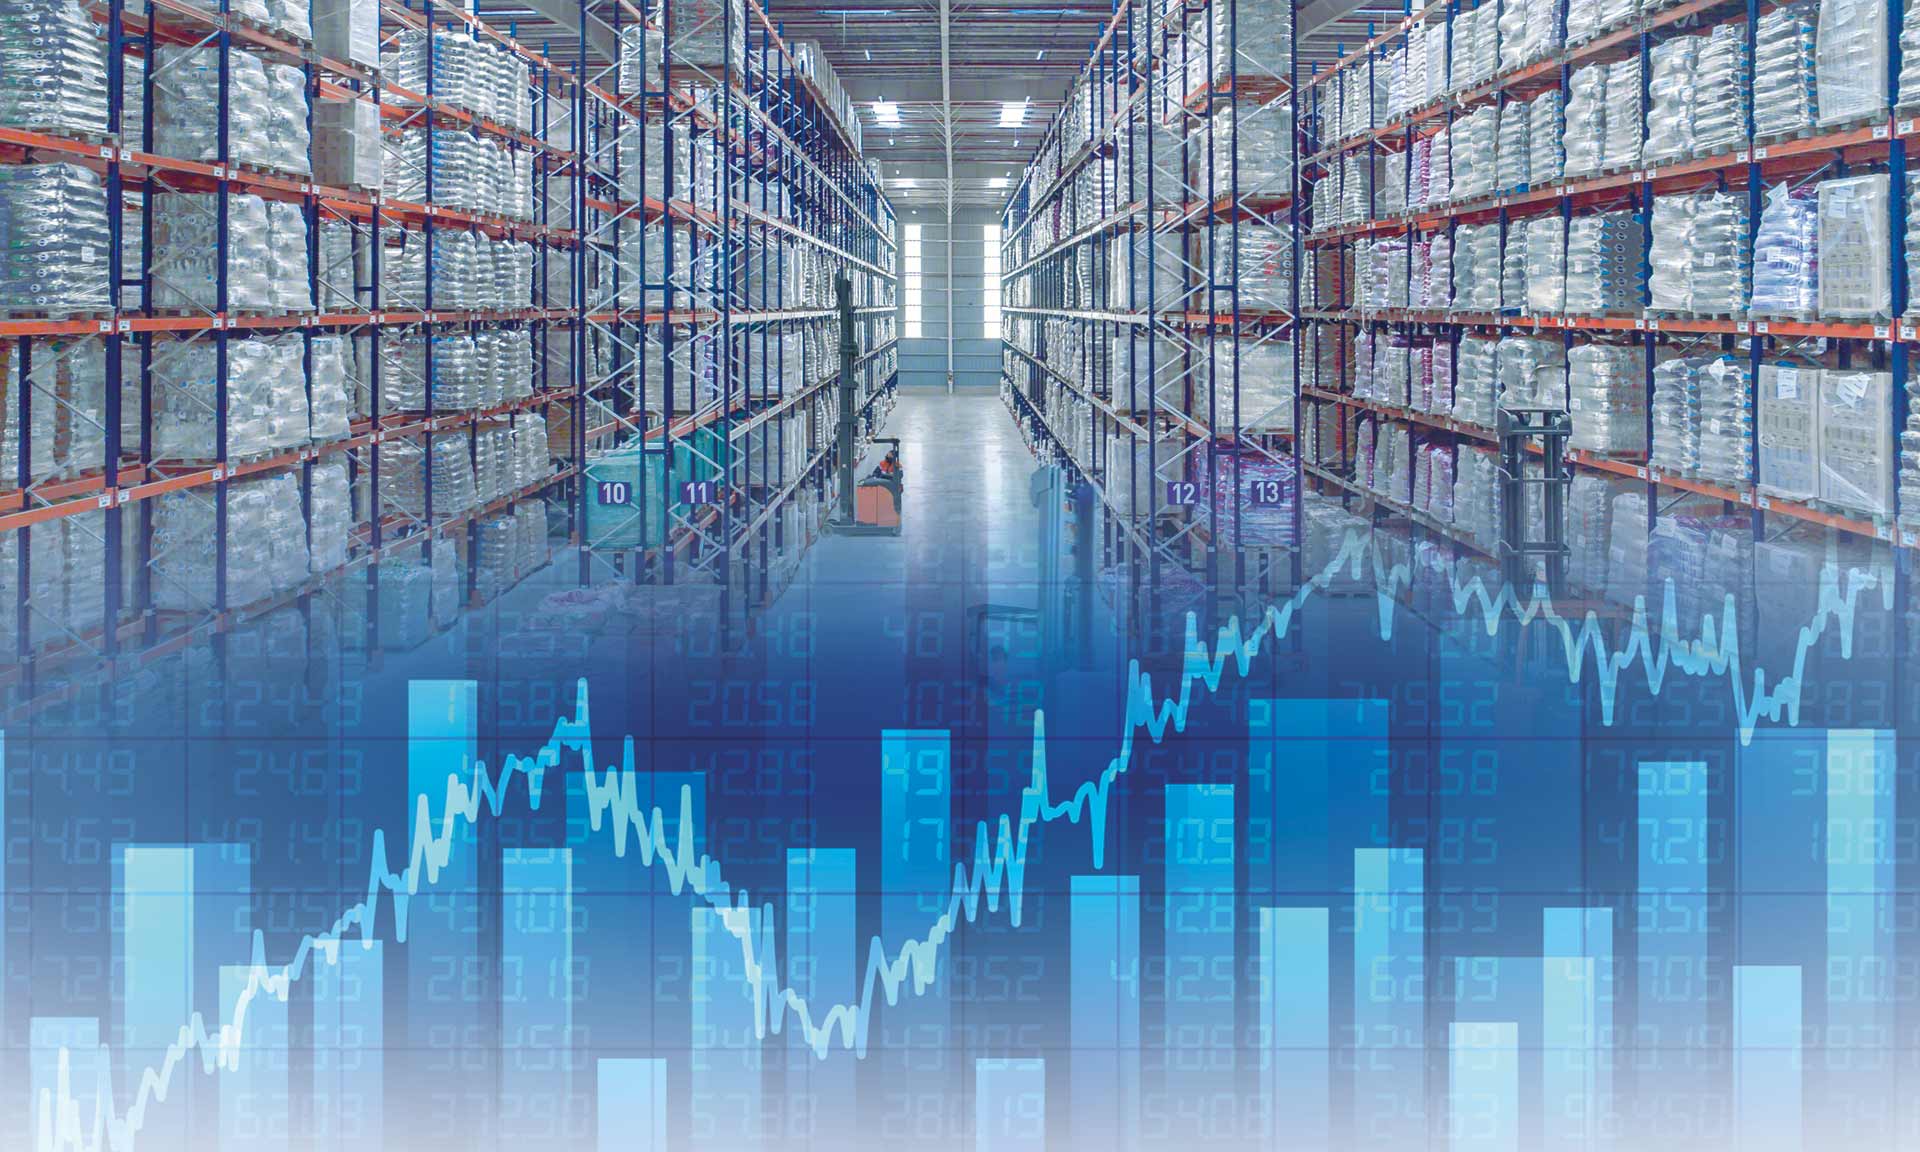 The maximum stock level is the largest number of goods a company can store